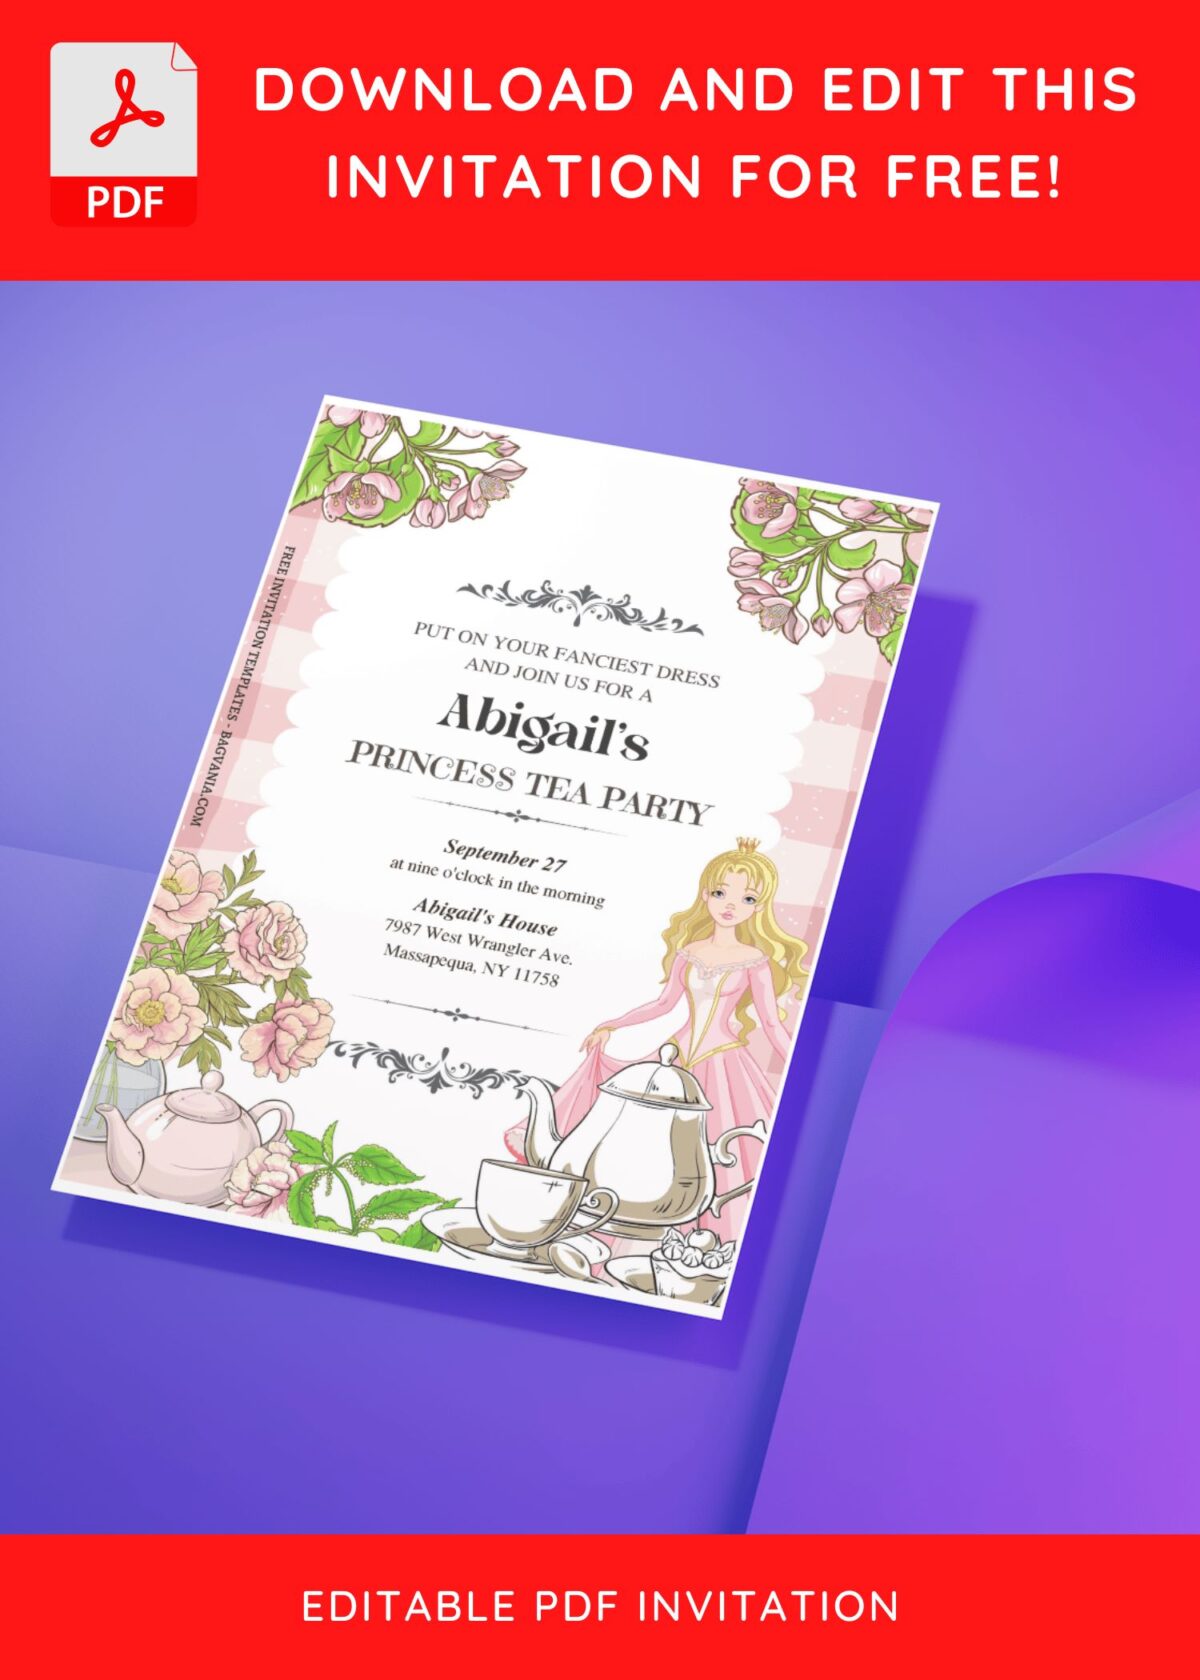 (Free Editable PDF) Shimmering Princess Tea Party Invitation Templates with watercolor tea cup and pot